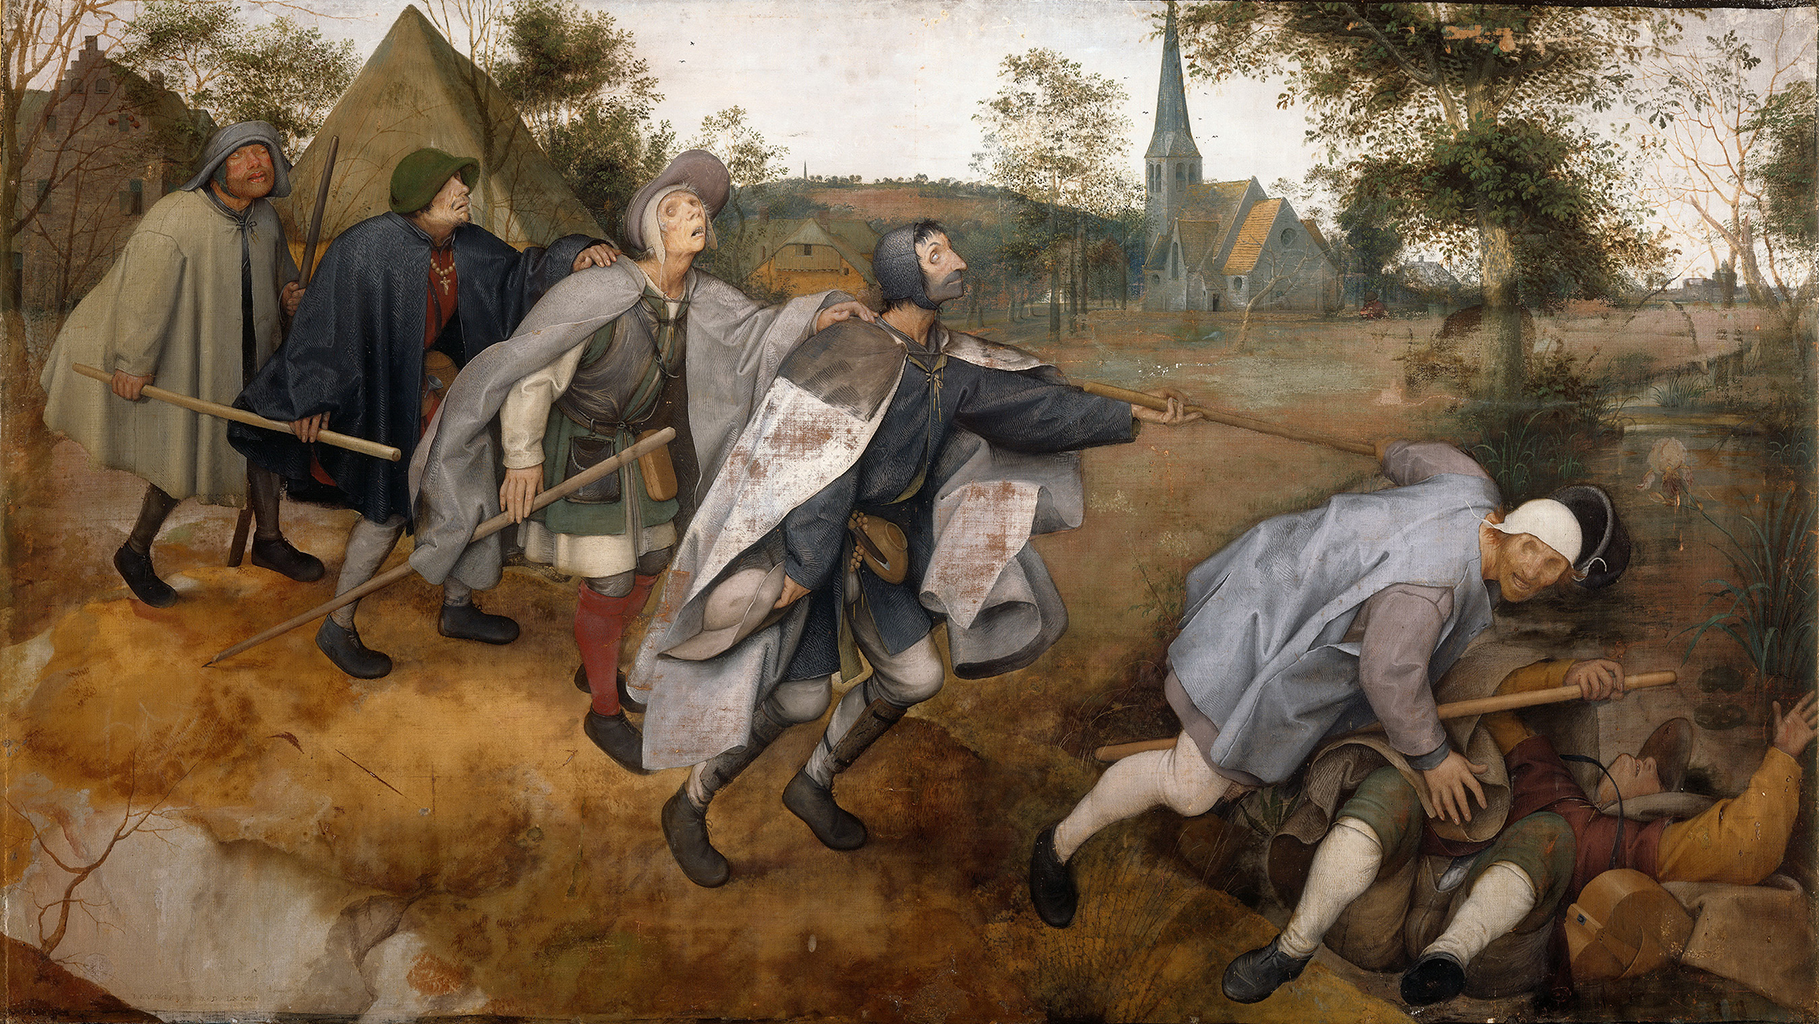 A painting that is depicting a group of six people wearing large coats or capes with hats, walking in a single file line. At the front of the line, a man wearing green, red, and orange, has fallen over on his back. A man wearing gray seems to be stumbling over them. The man at the back holds a stick that the one in front of him, and the other three men have their hands on each other shoulders. In the background, there seems to be a variety of buildings in a town along with trees and hills. Behind them is a small village surrounded by hills and trees.